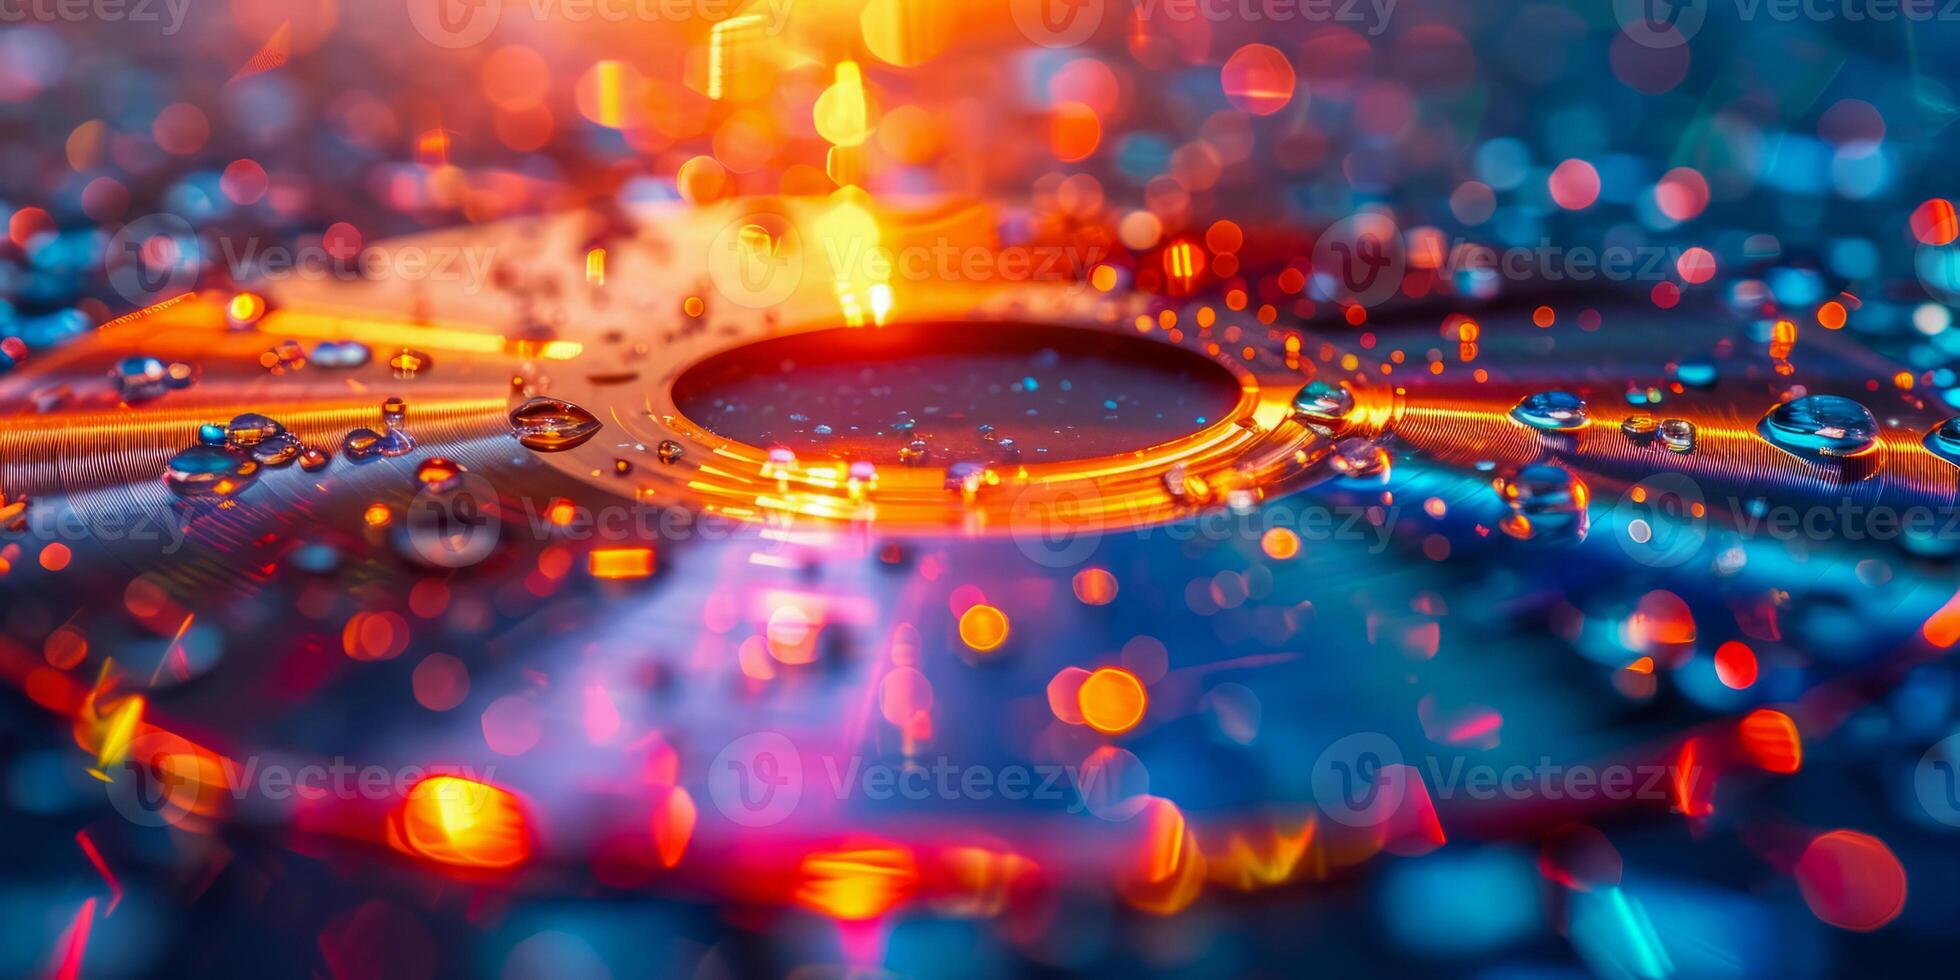 AI generated Compact discs, each disc reflects the interplay of light and shadow, showcasing the beauty and artistry of audio storage mediums photo